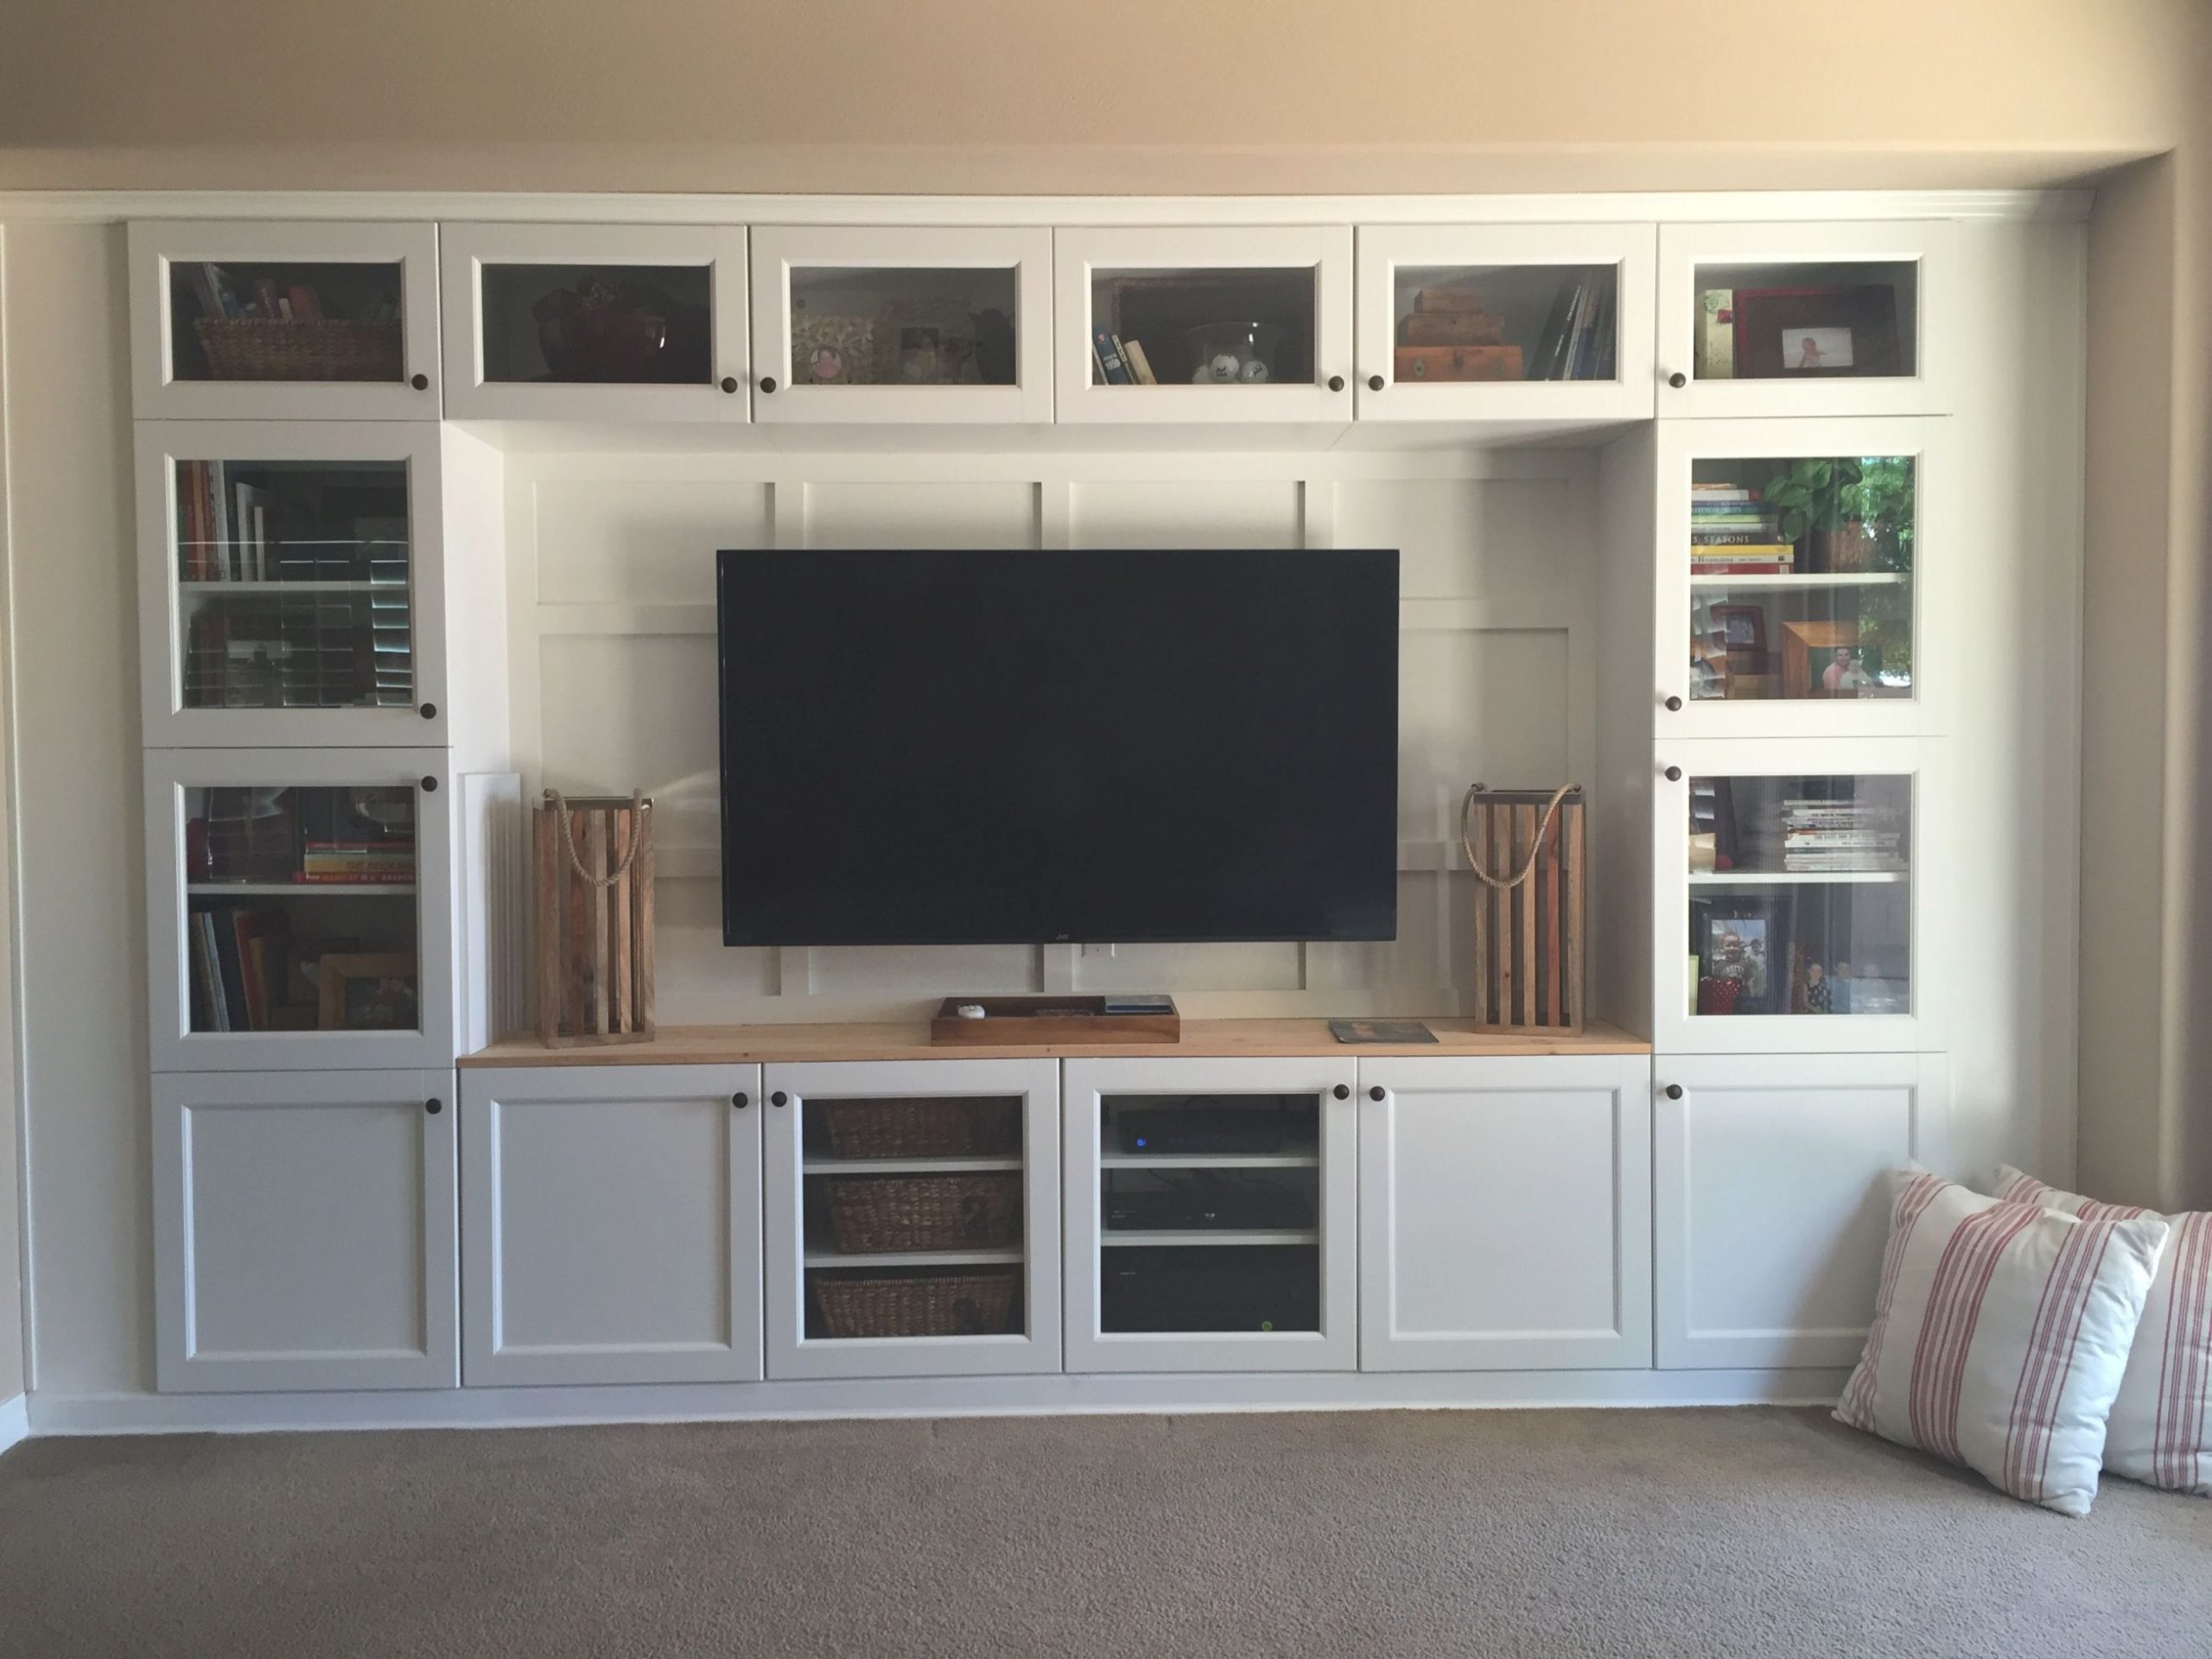 Best of Ikea Wall Cabinets Living Room - Awesome Decors